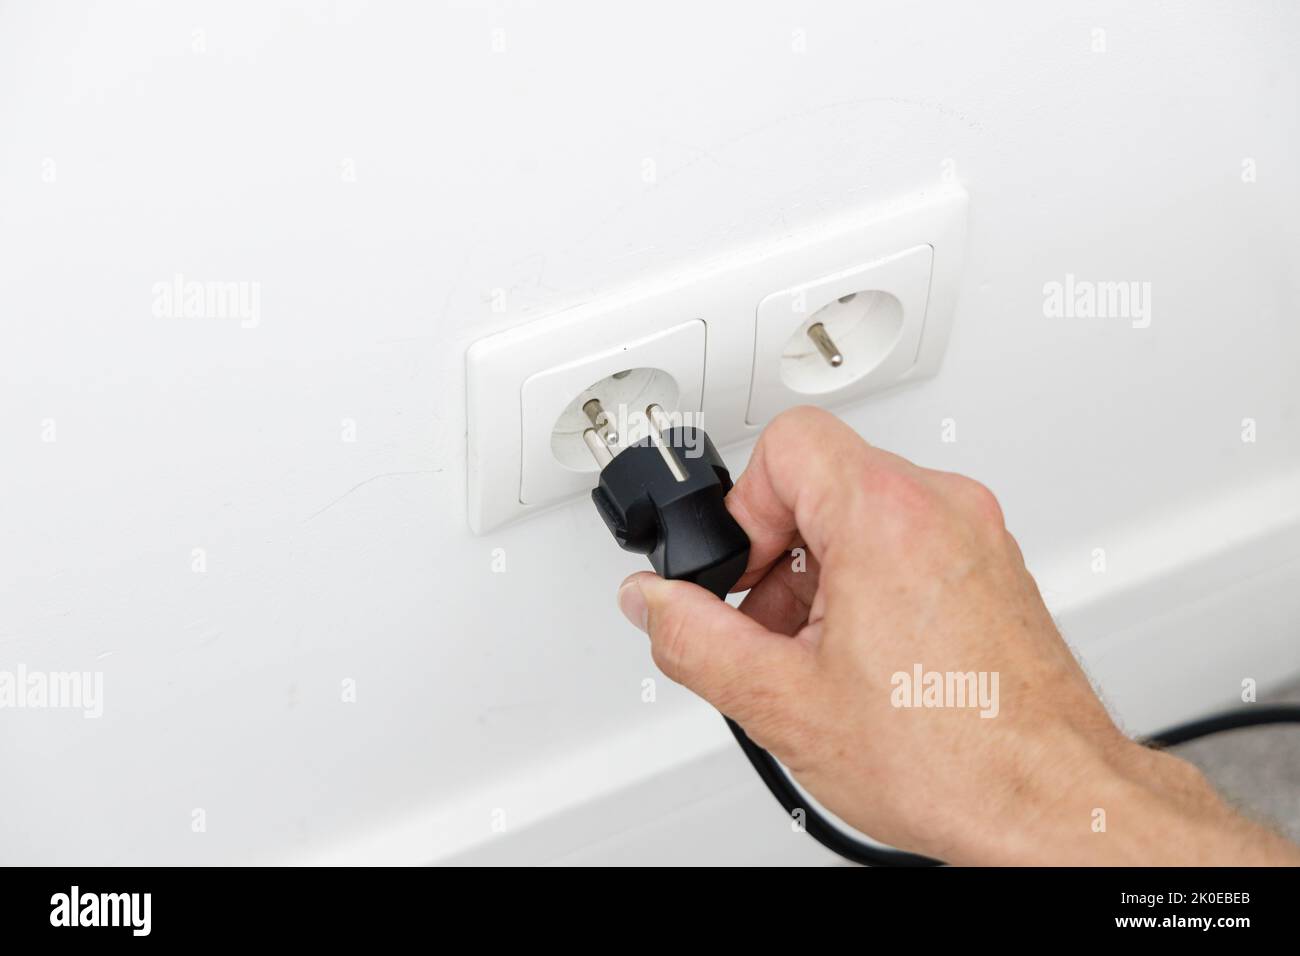 Saving energy at home, removing the plug from the socket Stock Photo